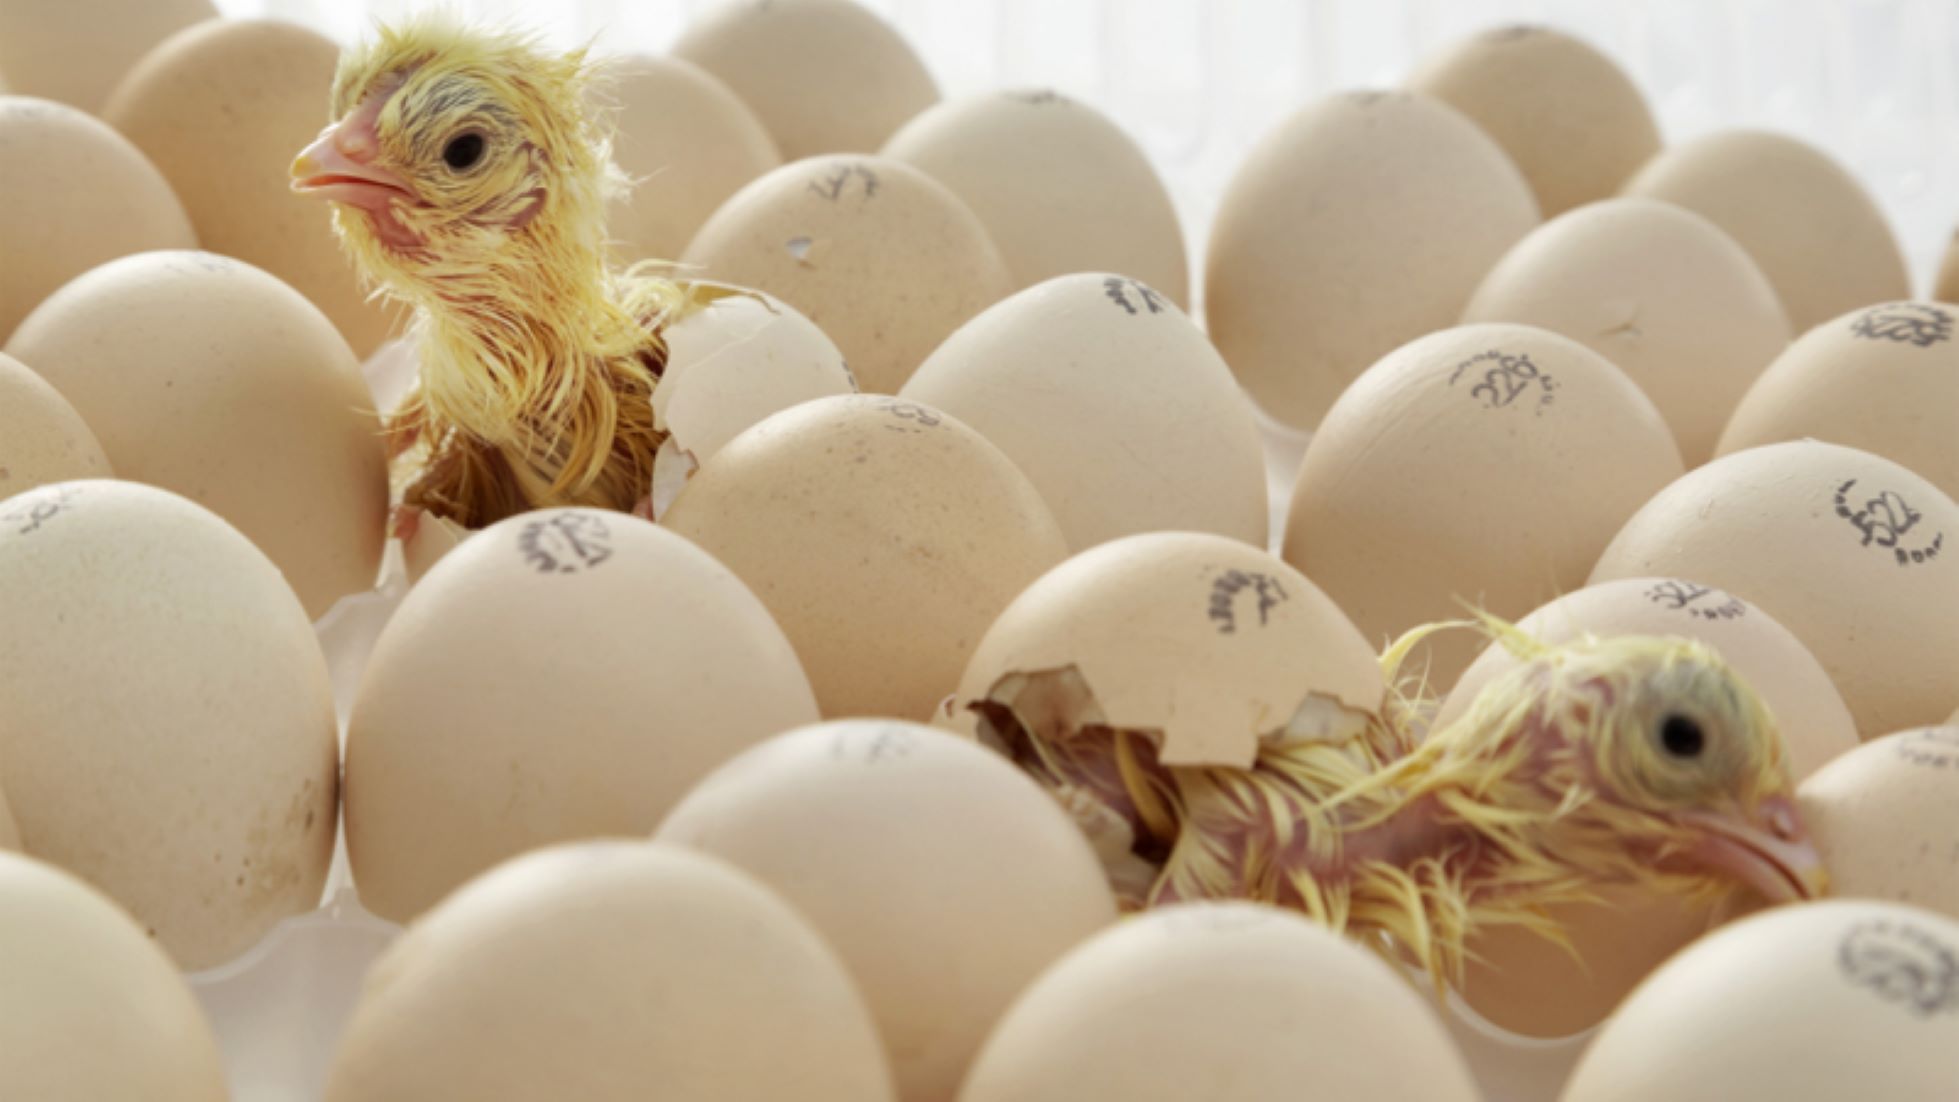 Sri Lanka To Import Hatching Eggs From Netherlands To Tackle Chicken, Egg Shortage